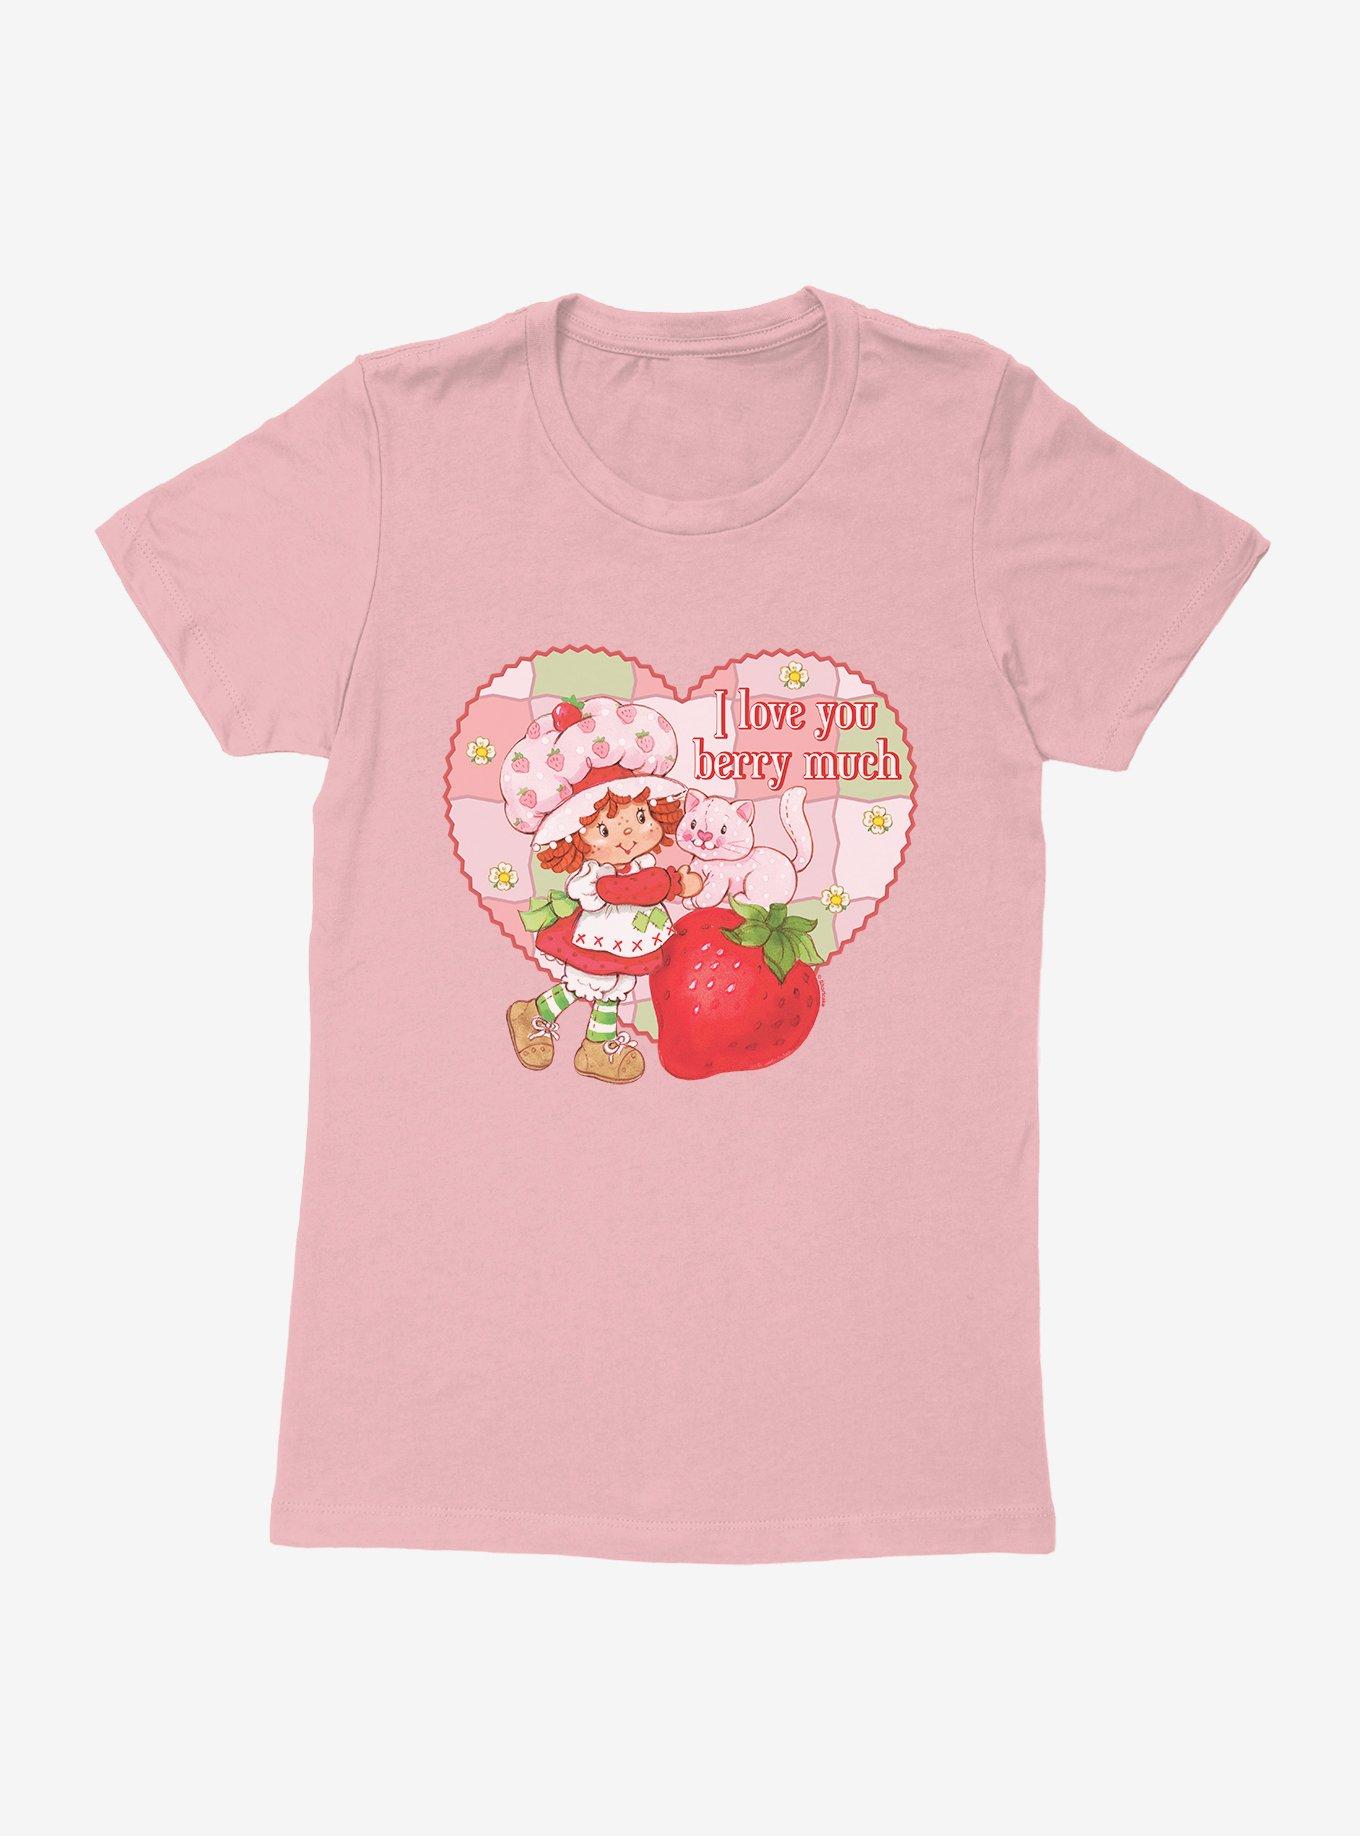 Strawberry Shortcake I Love You Berry Much Womens T-Shirt, LIGHT PINK, hi-res